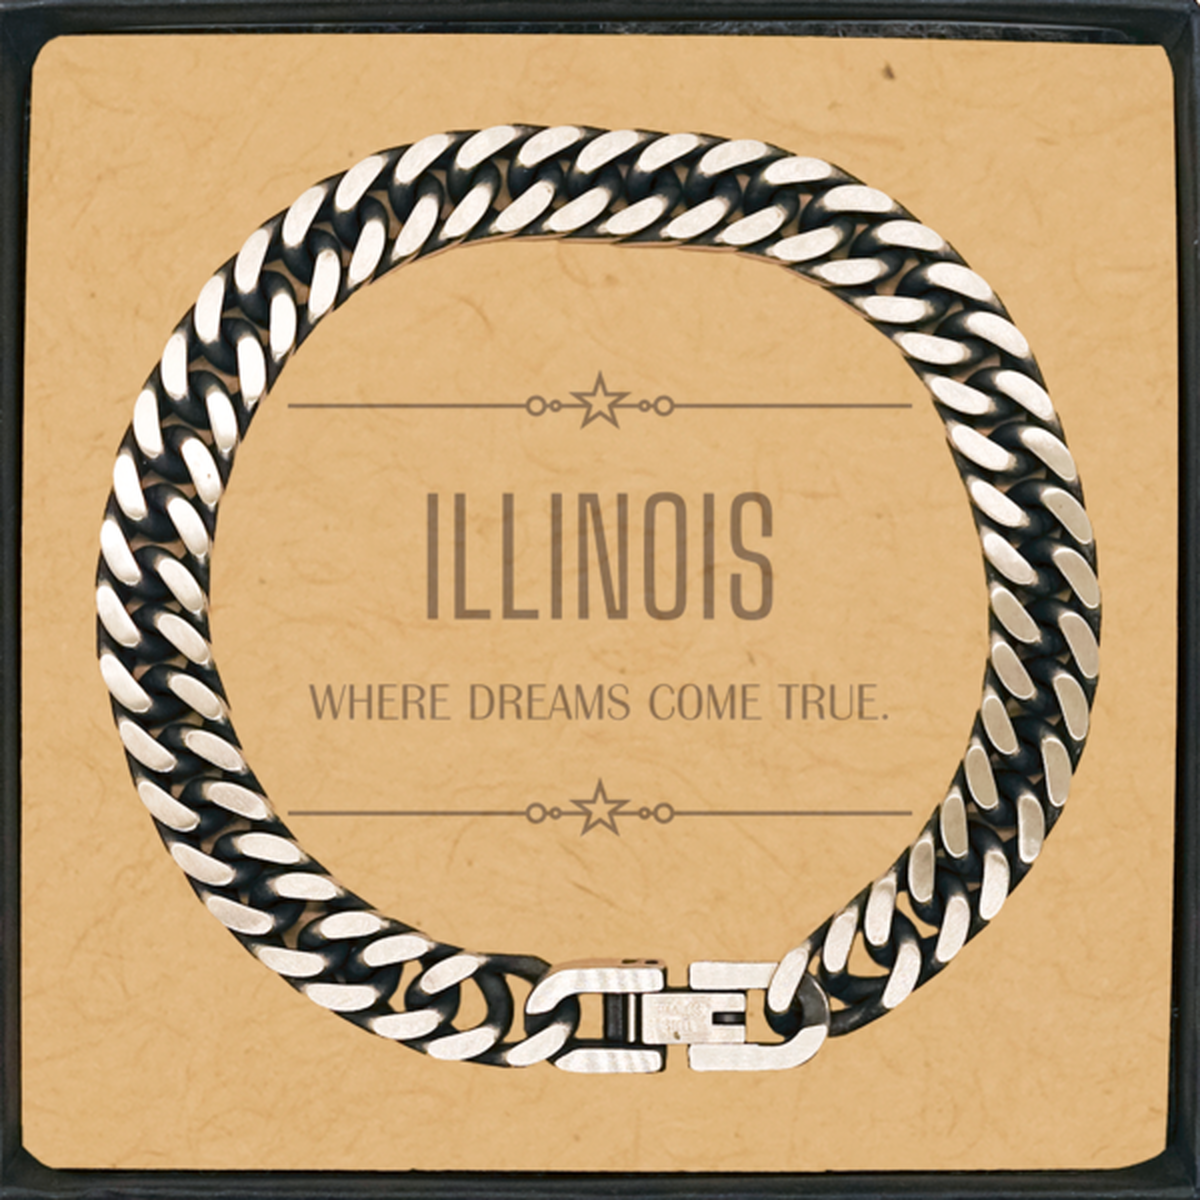 Love Illinois State Cuban Link Chain Bracelet, Illinois Where dreams come true, Birthday Inspirational Gifts For Illinois Men, Women, Friends